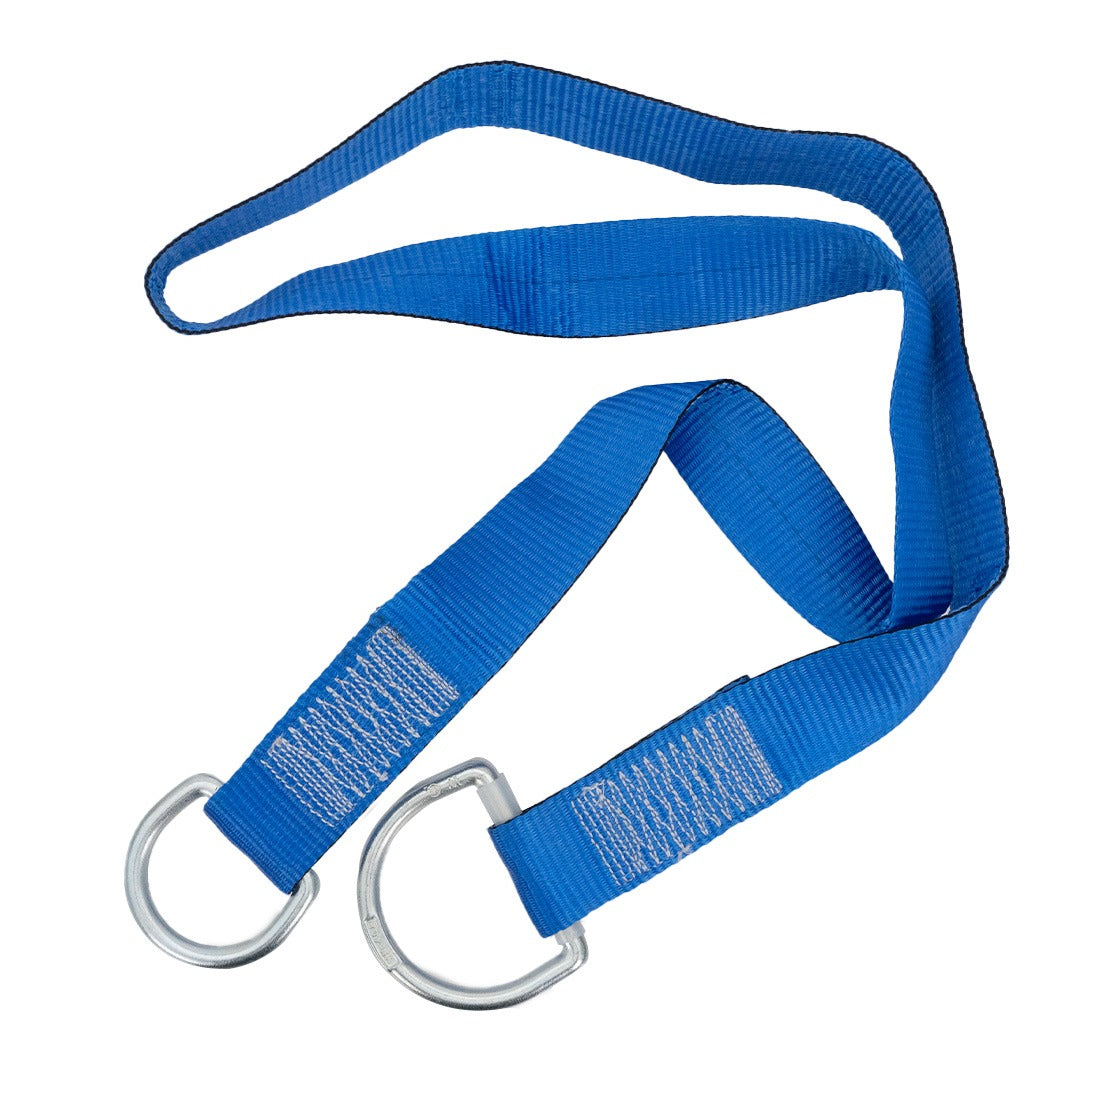 Miller Cross Arm Strap - 6 Foot Ring View